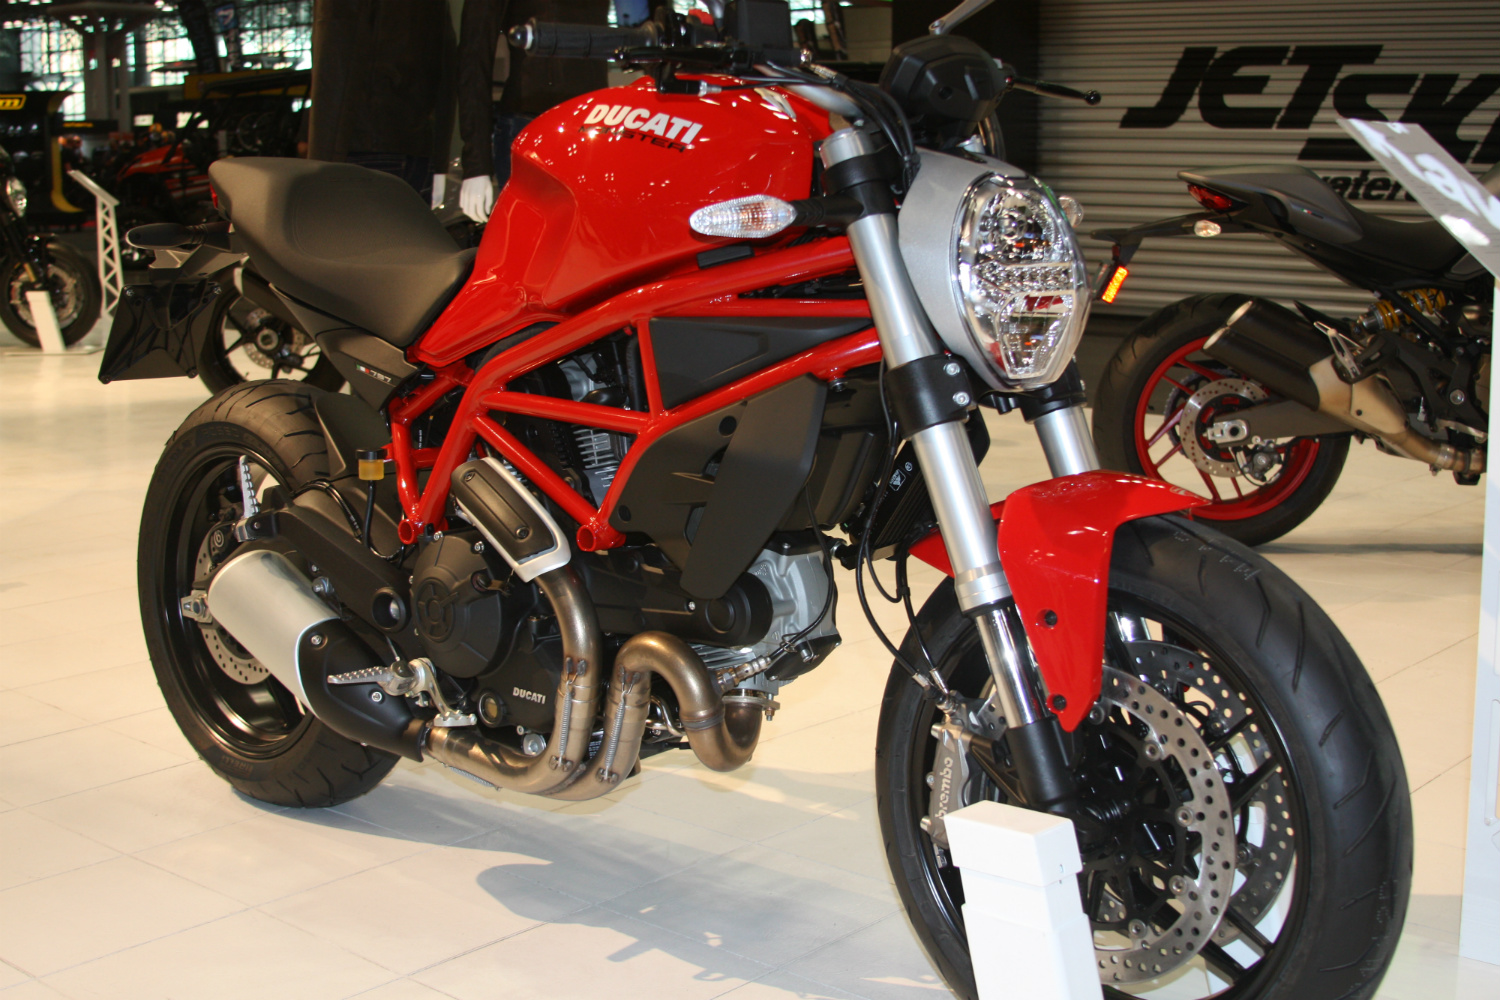 Ducati at the 2016 International Motorcycle Show